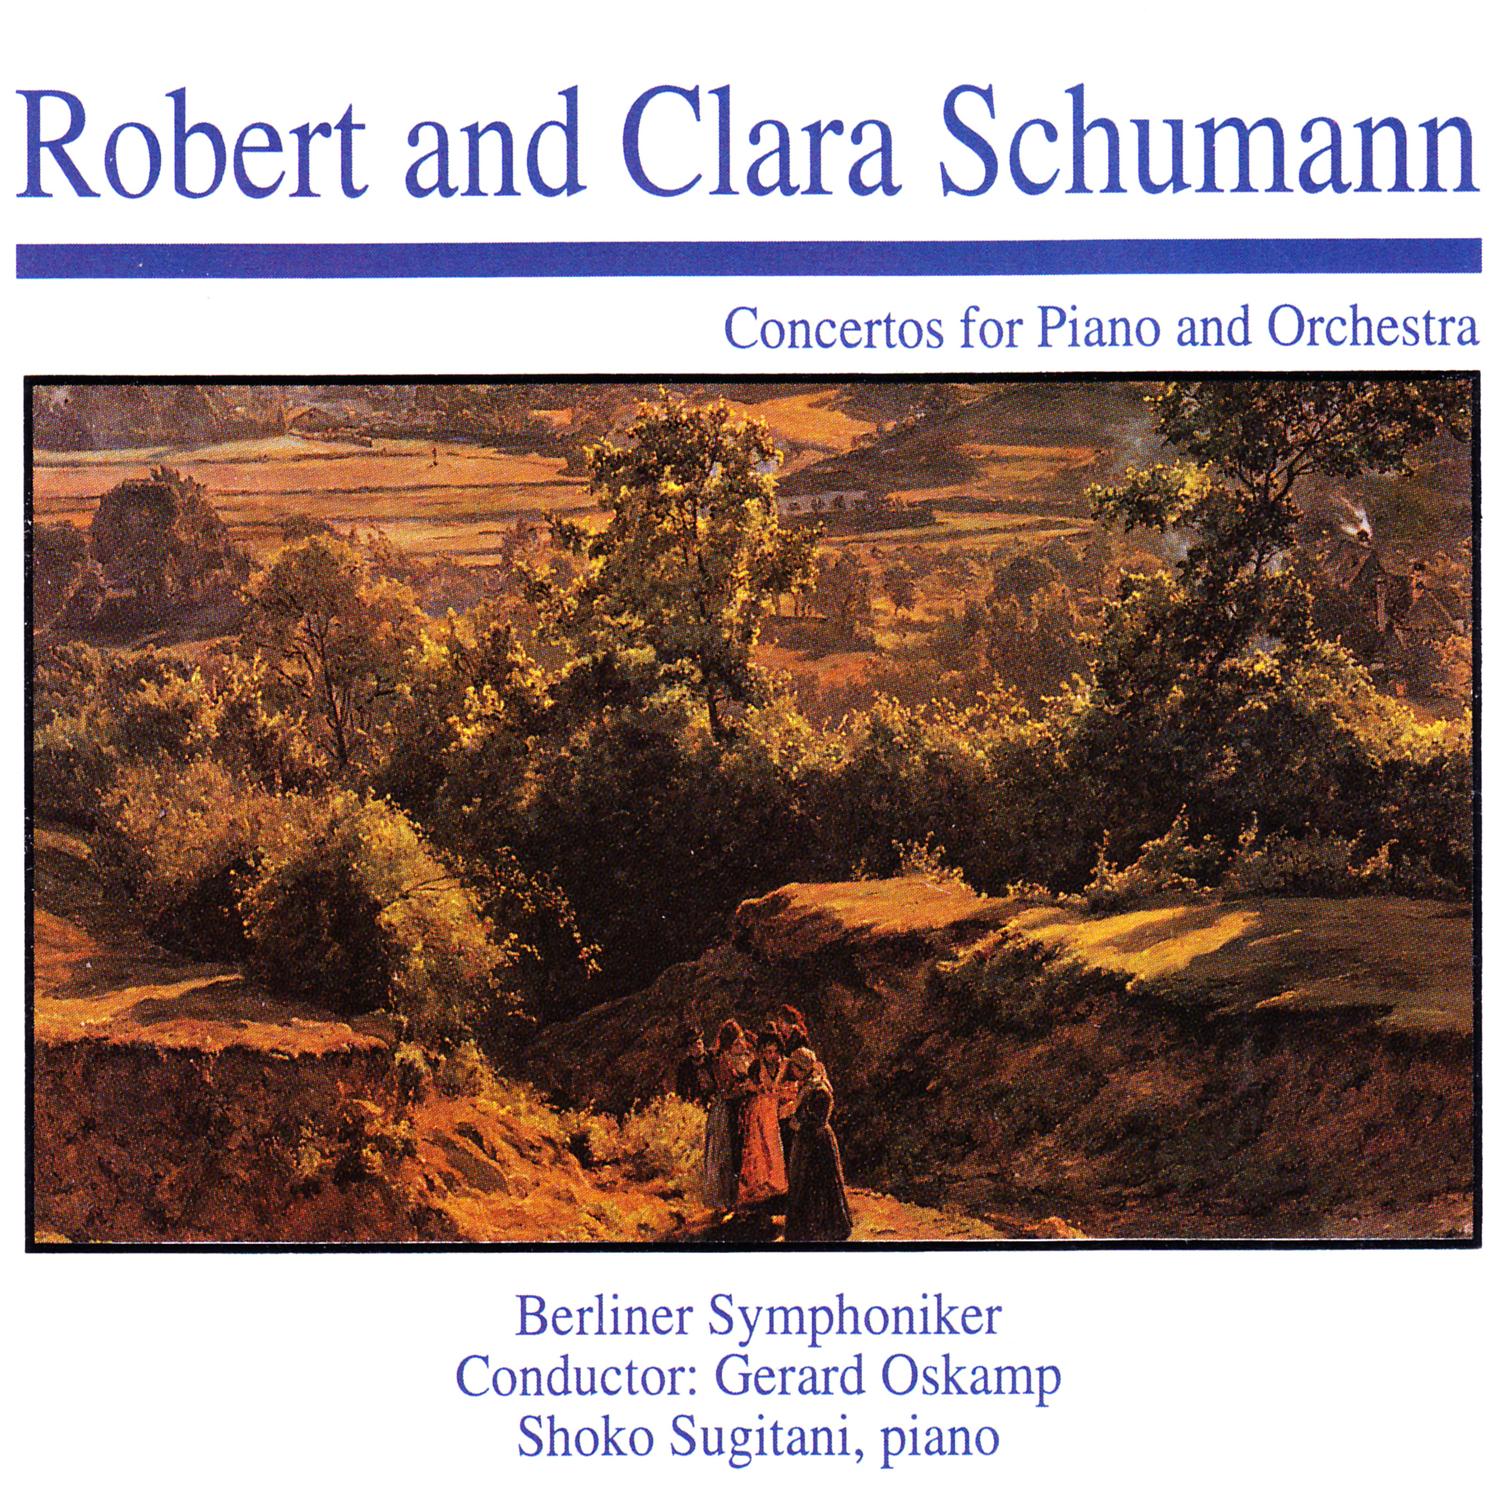 Piano and Orchestra Concerto in A Minor, Op. 54: III. Allegro vivace